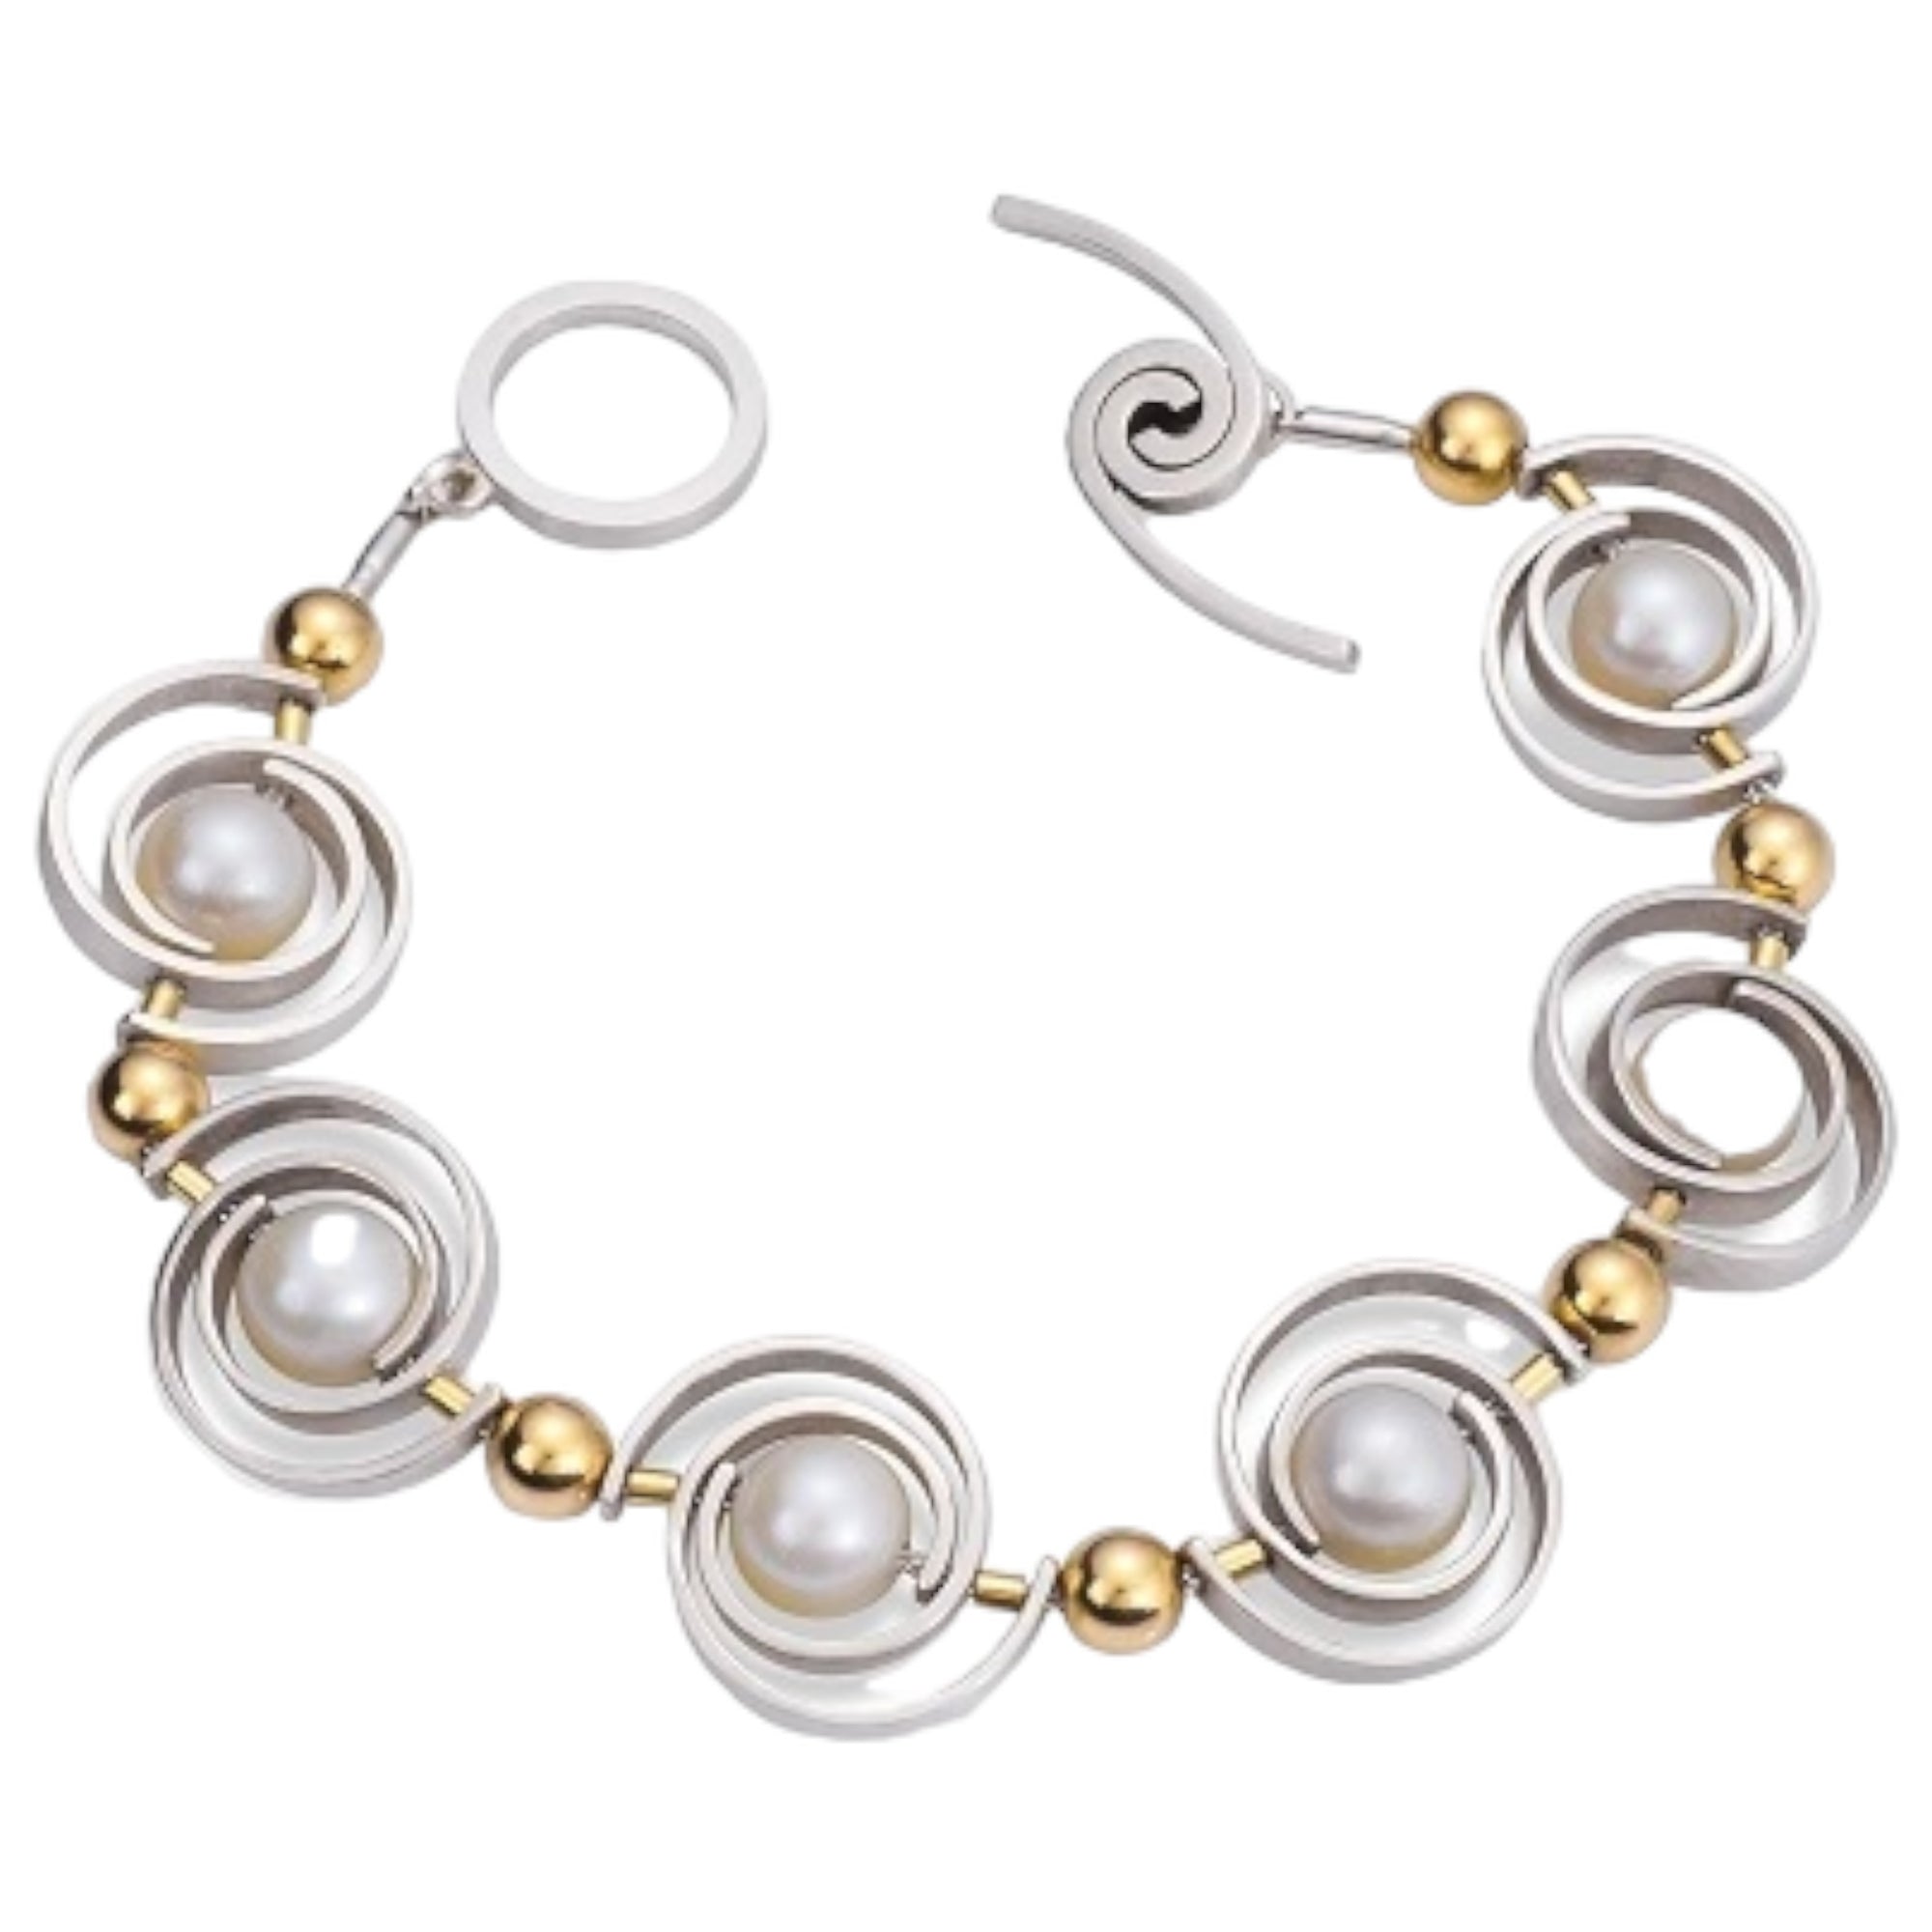 Orbit Articulating 2-tone Bracelet by Martha Seely available at Talisman Collection Fine Jewelers in El Dorado Hills, CA and online. Stats: Take your style to the next level with this stunning bracelet featuring large spirals in Argentium silver. Adorned with elegant white pearls and bold 14K beads, it's a piece that will catch everyone's eye. With its WINDSWEPT toggle, this bracelet also offers a secure and comfortable fit.